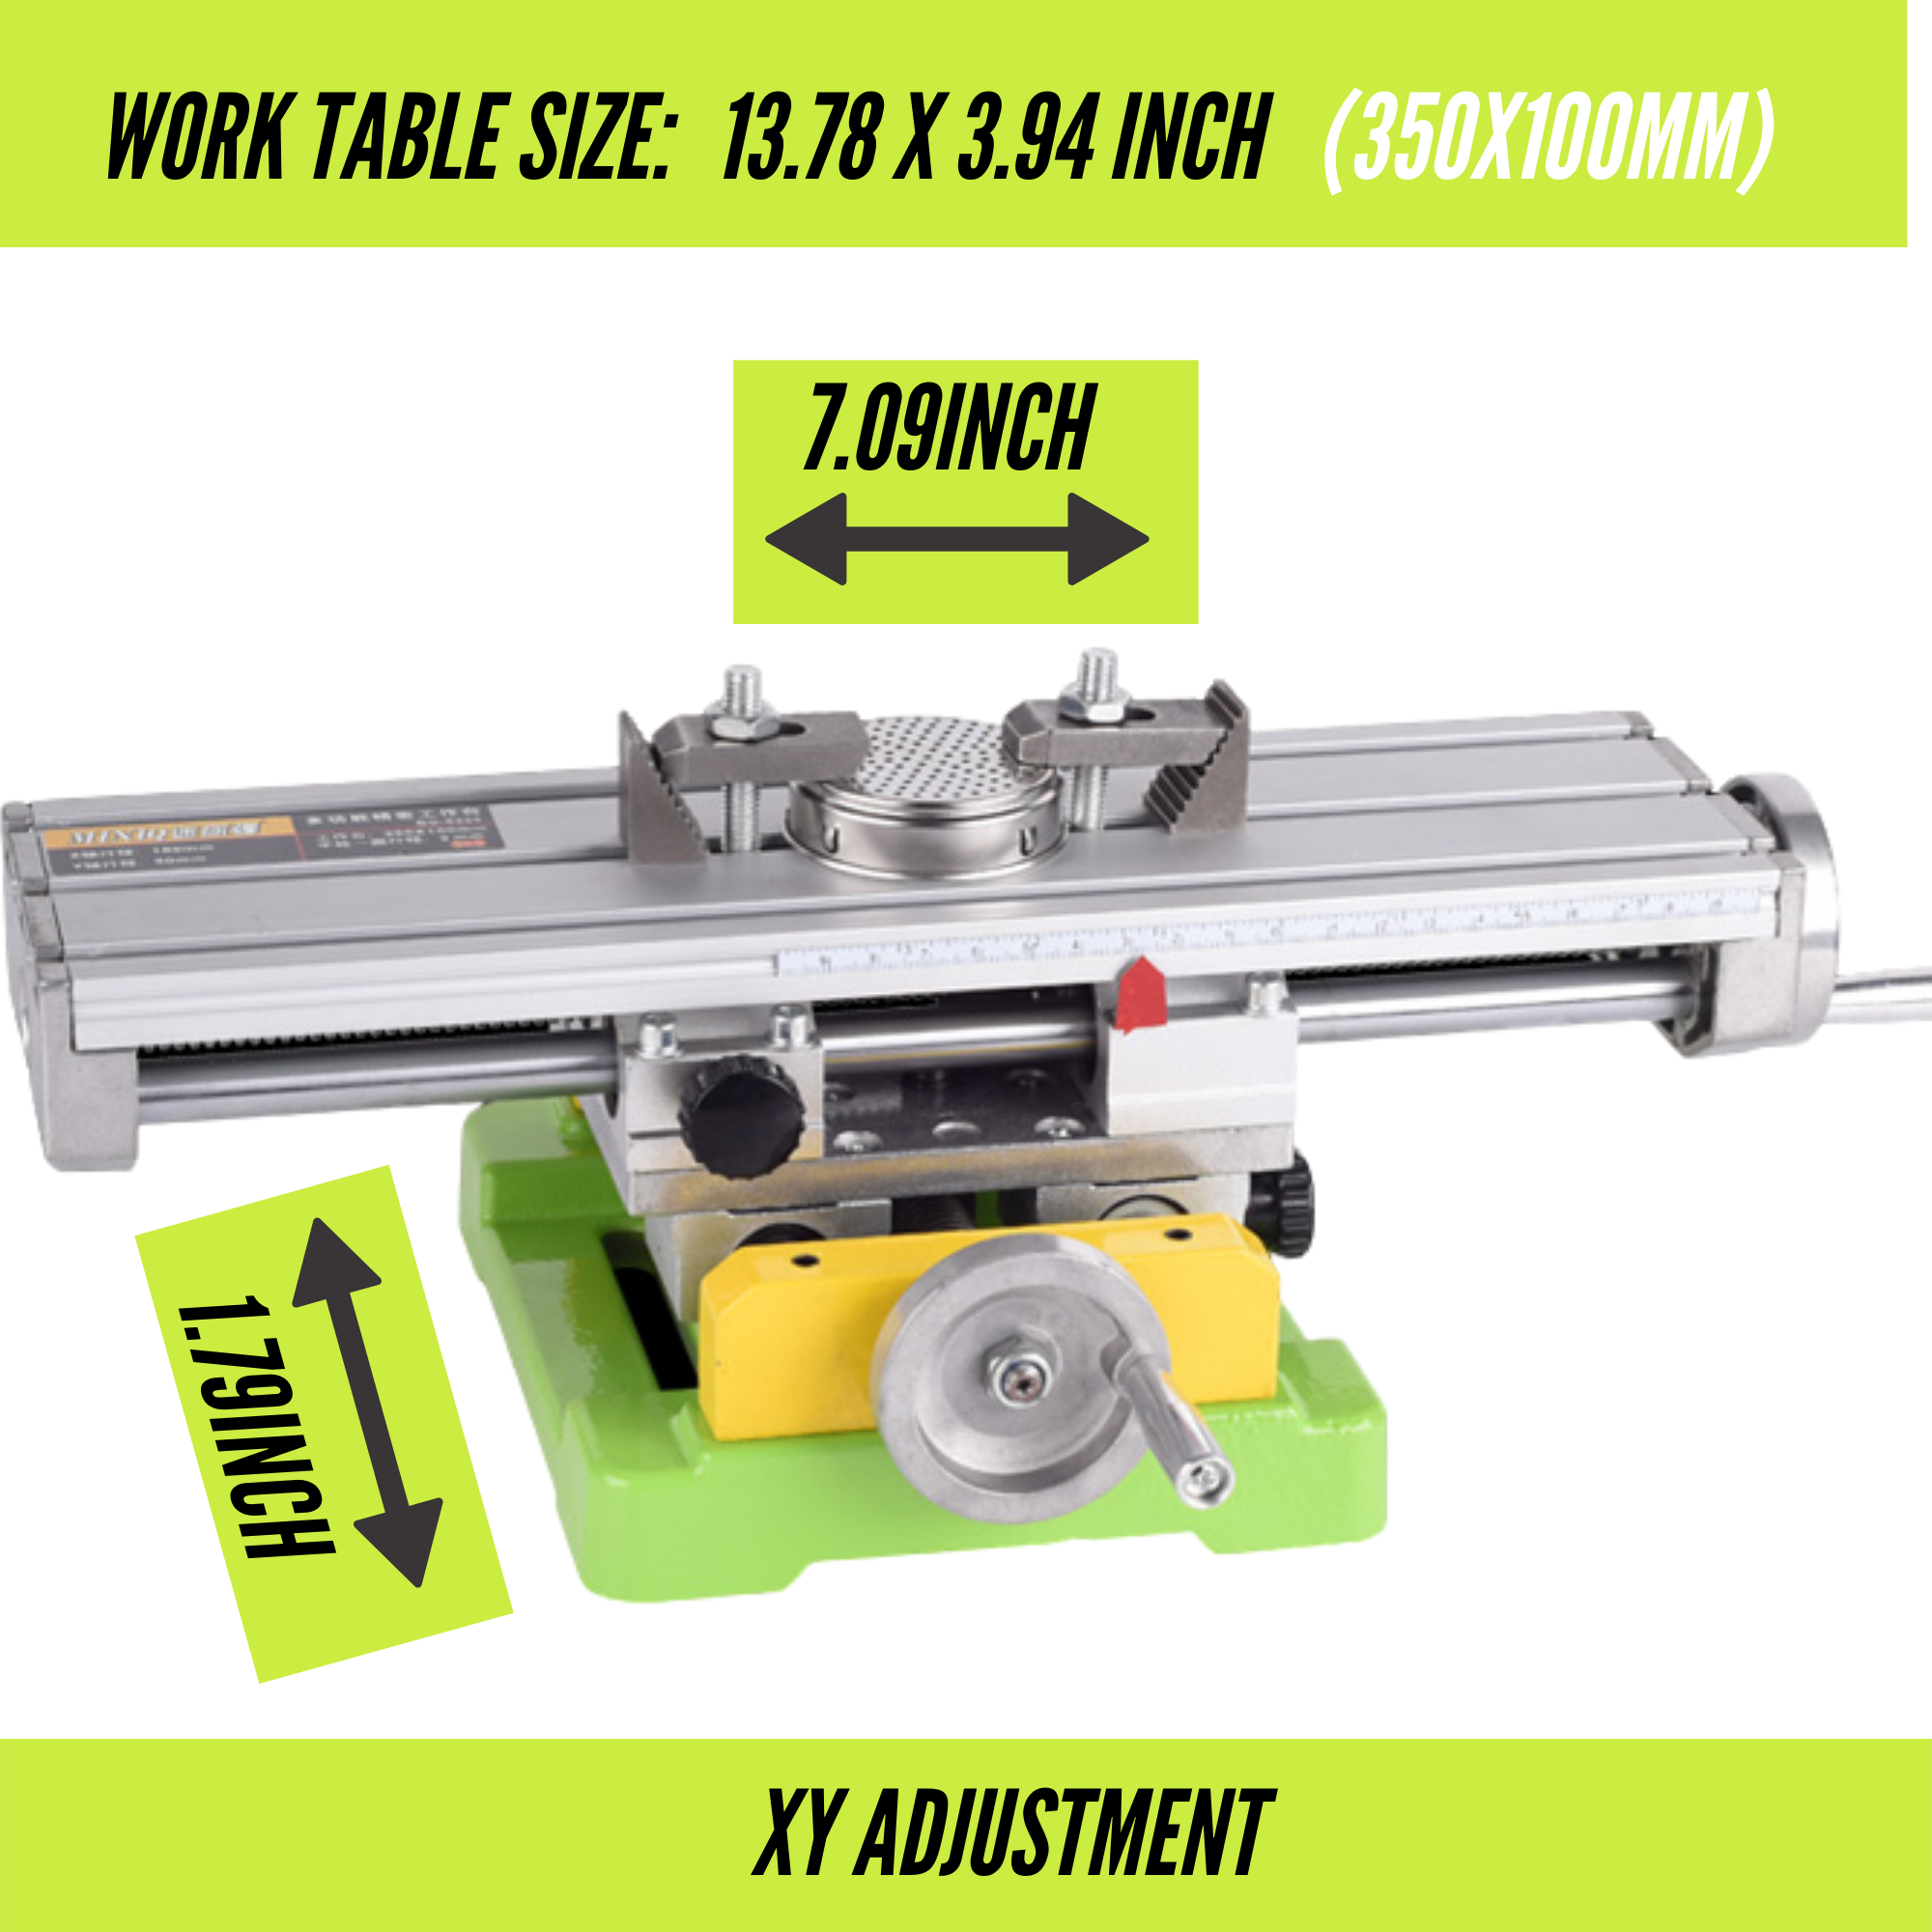 Multi-function Worktable Milling Machine Compound Drilling Slide Table Cross Sliding Table Vise For DIY Lathe Bench Drill Shipping From USA Drill Vise Fixture Working Table 